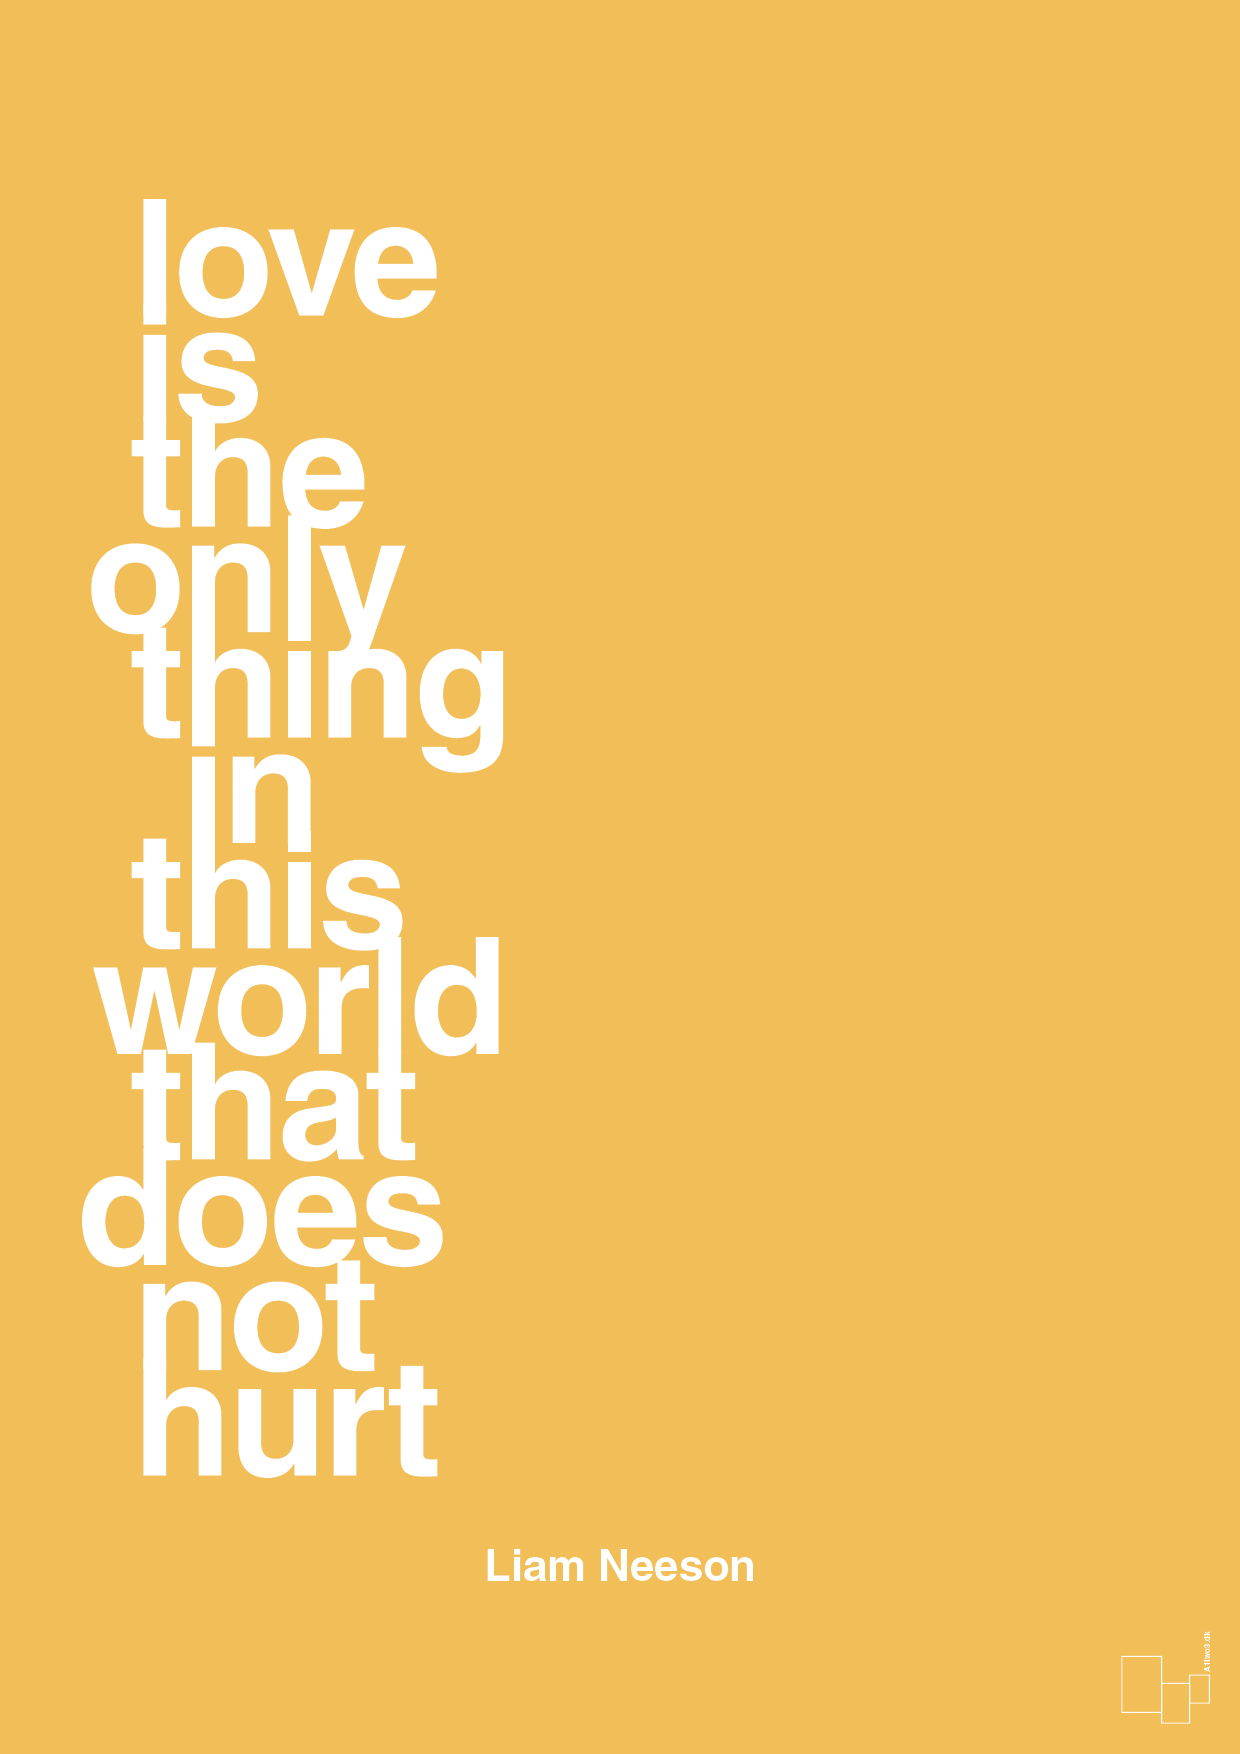 love is the only thing in this world that does not hurt - Plakat med Citater i Honeycomb